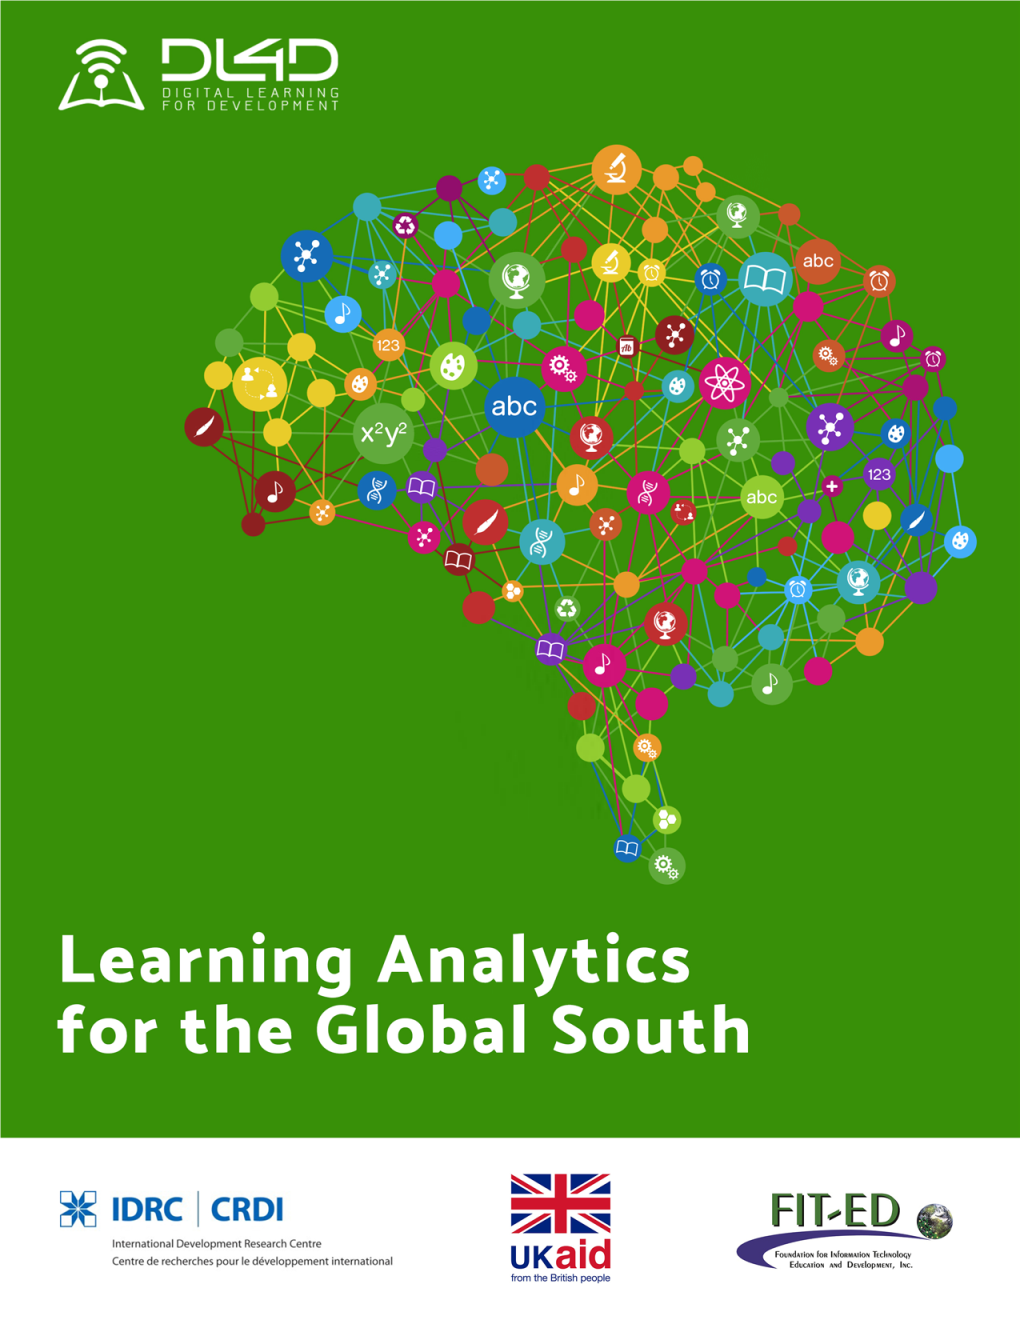 Learning Analytics for the Global South Is Made Available Under a Creative Commons Attribution 4.0 International License